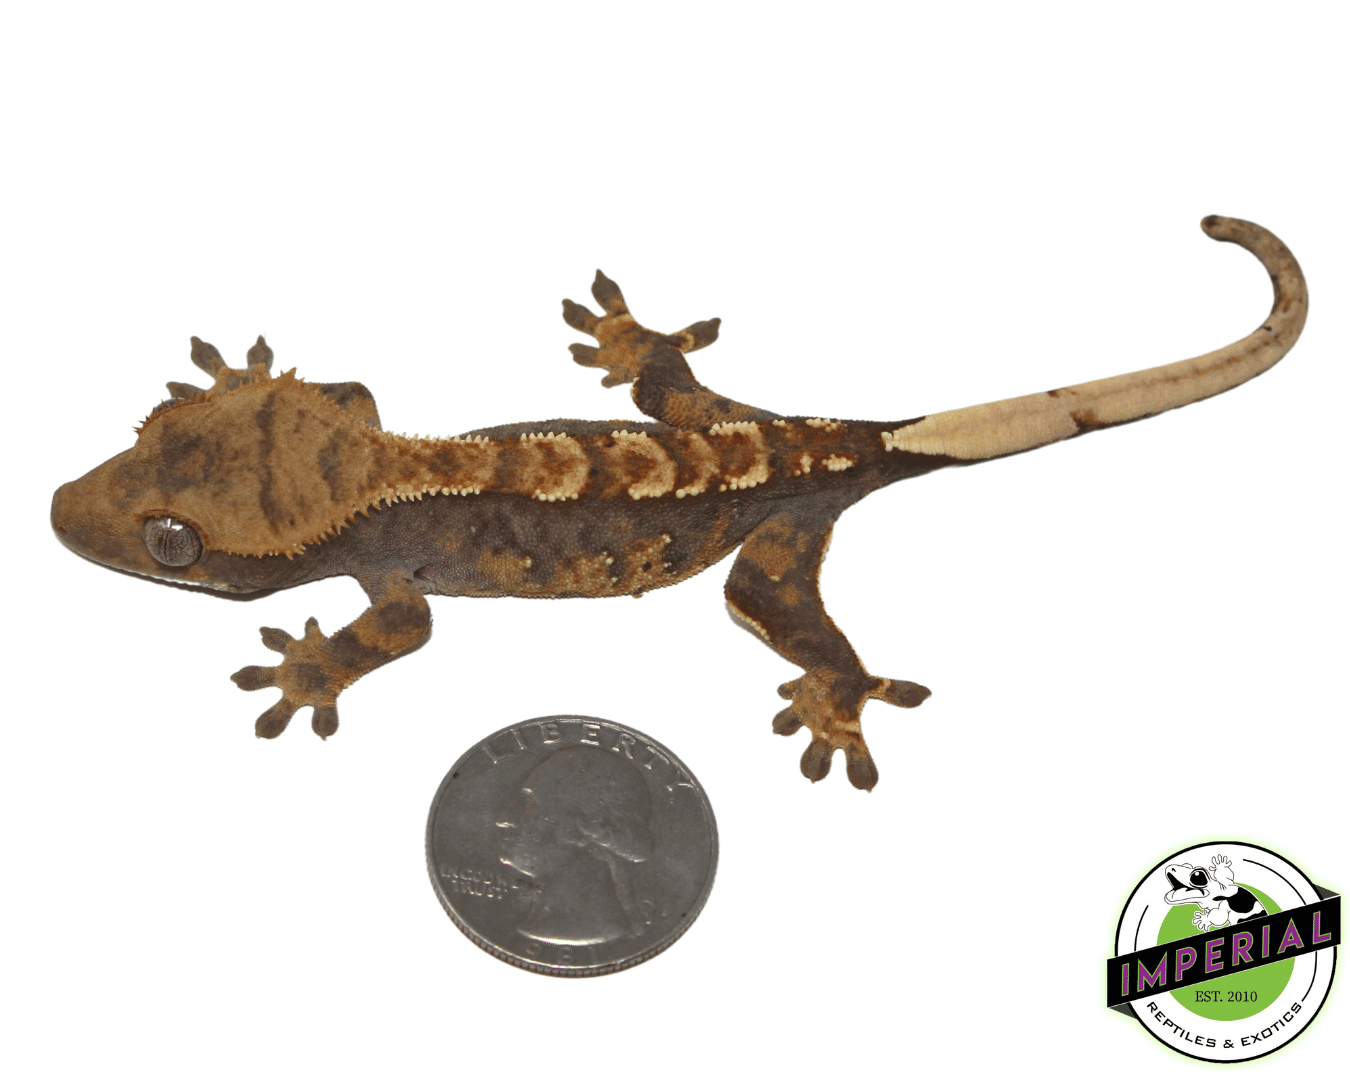 crested gecko for sale, buy reptiles online